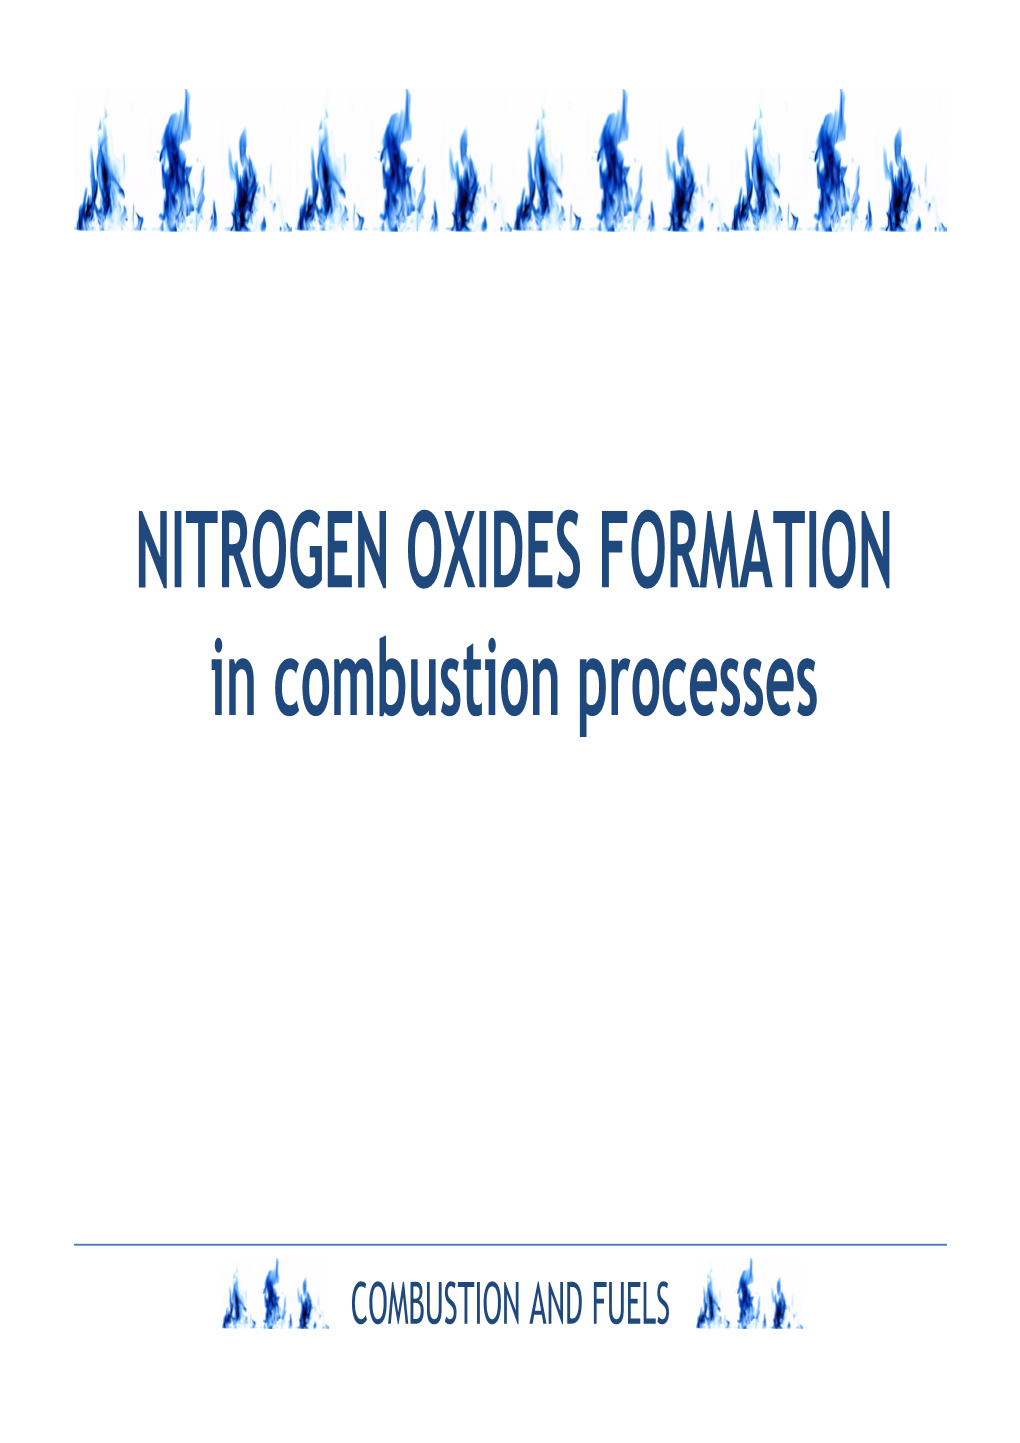 NITROGEN OXIDES FORMATION in Combustion Processes